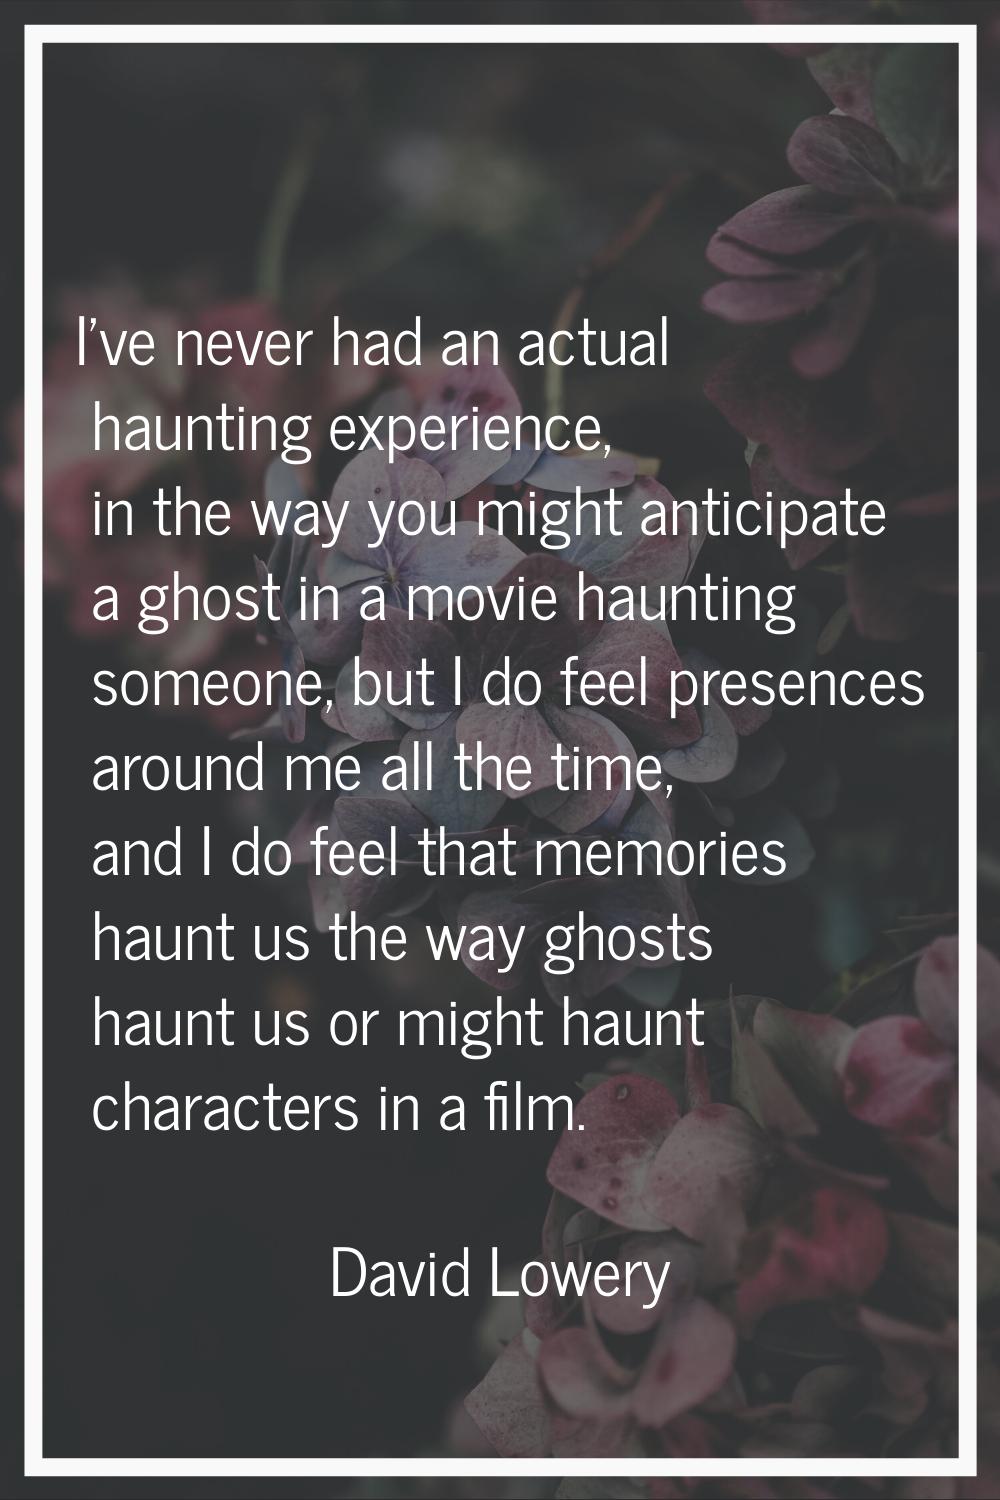 I've never had an actual haunting experience, in the way you might anticipate a ghost in a movie ha